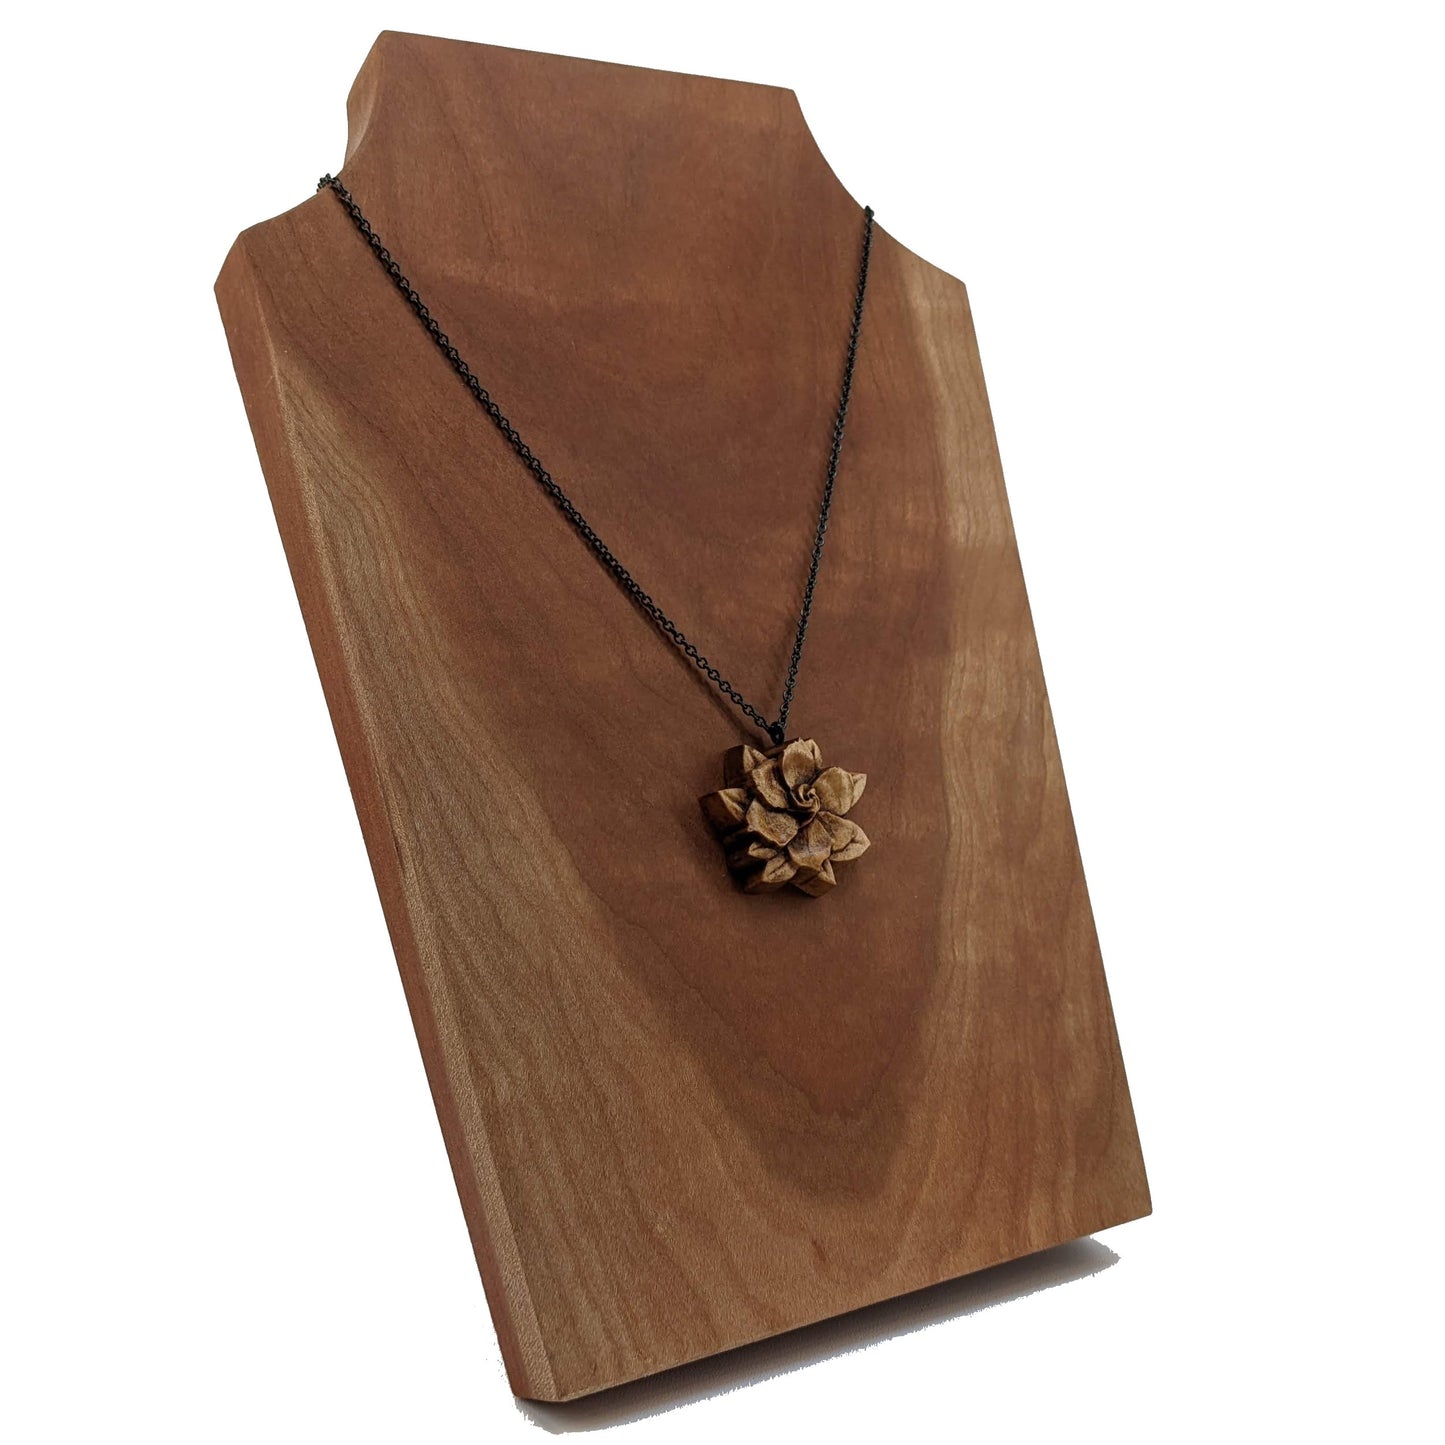 Wooden flower necklace pendant carved in the shape of a gardenia against. Made from hard maple and hanging from a black stainless steel chain against a cherry wood background.